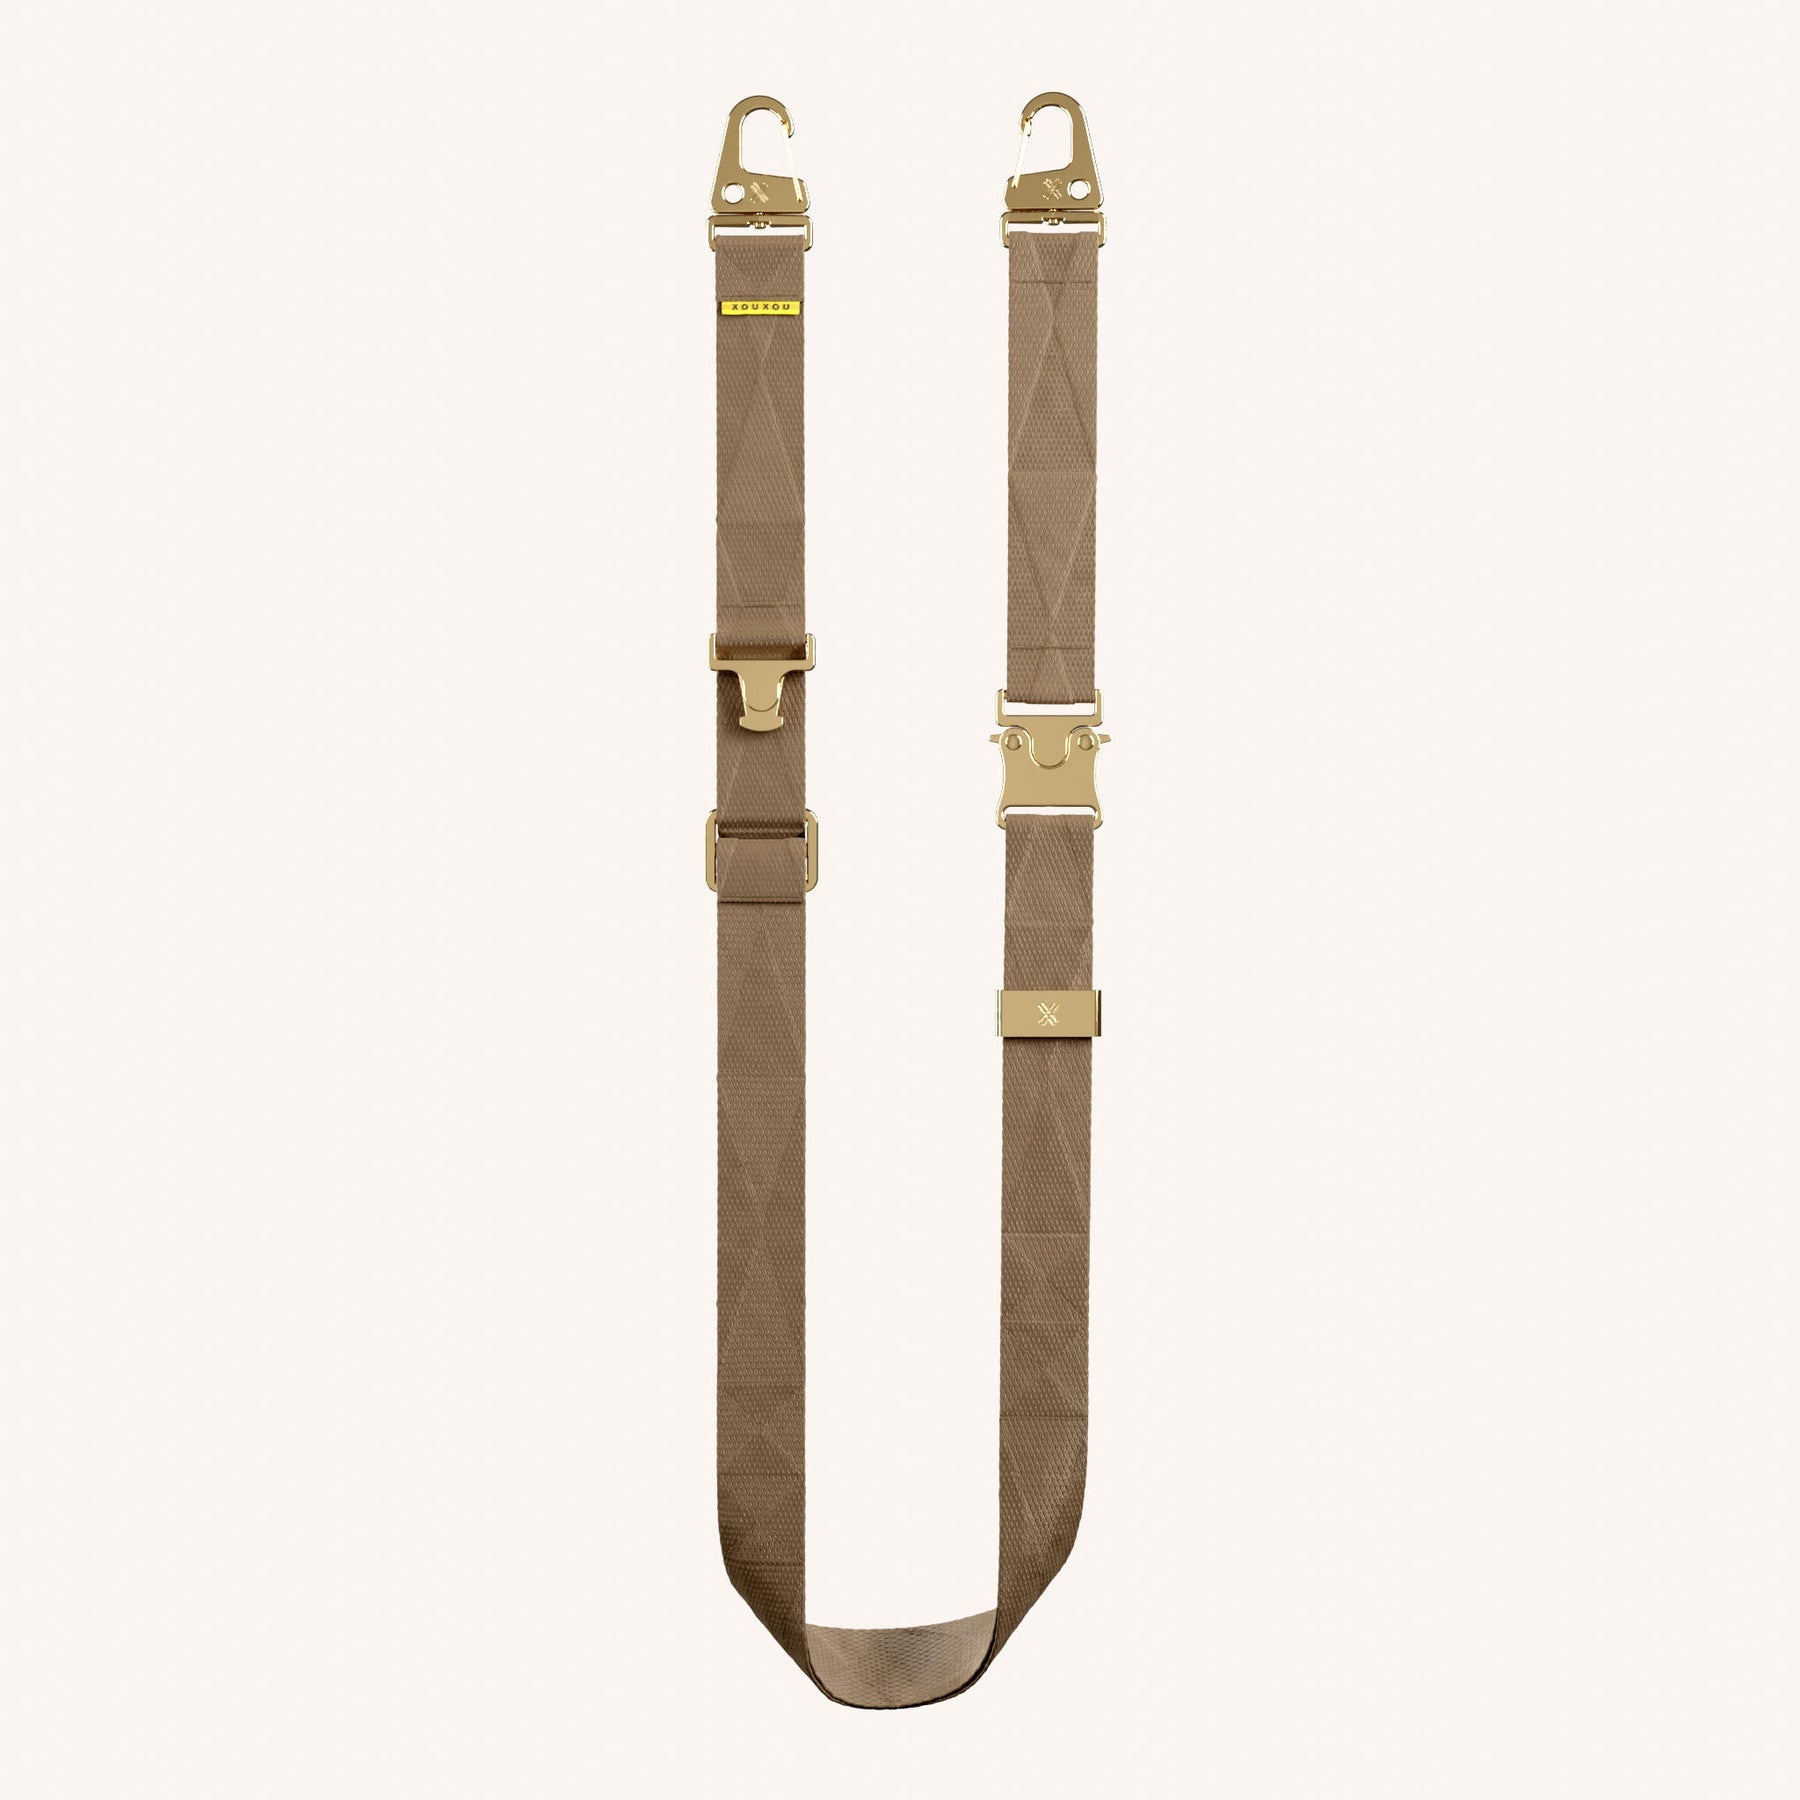 Phone Strap Lanyard in Taupe Total View | XOUXOU